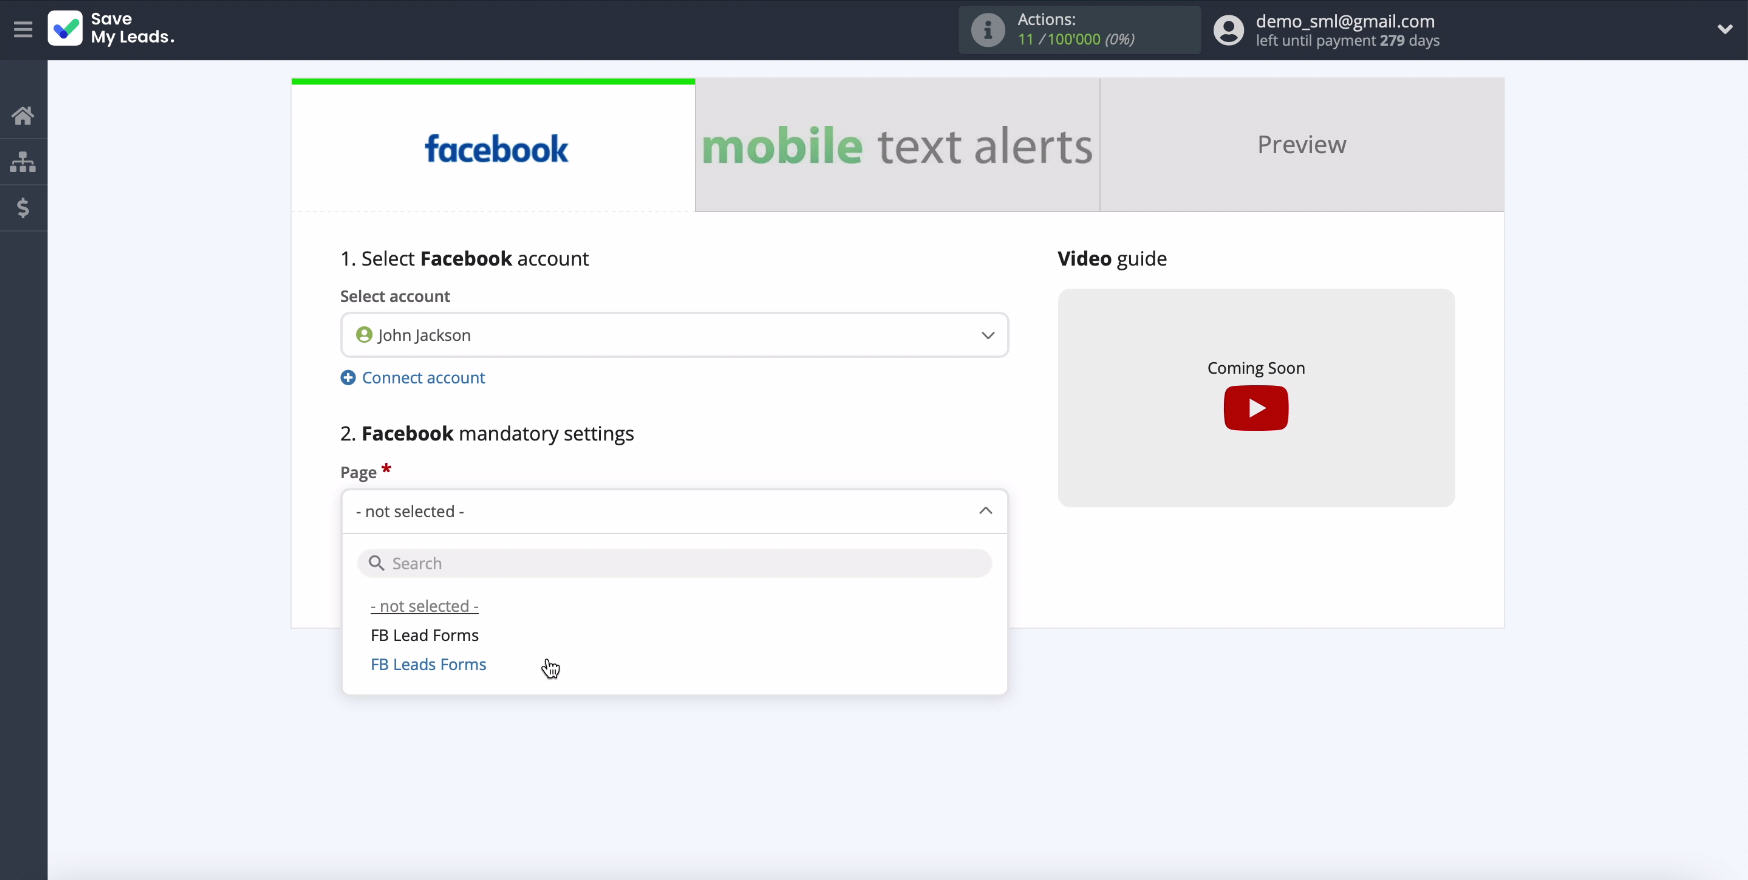 Facebook and Mobile Text Alerts integration | Select a page&nbsp;